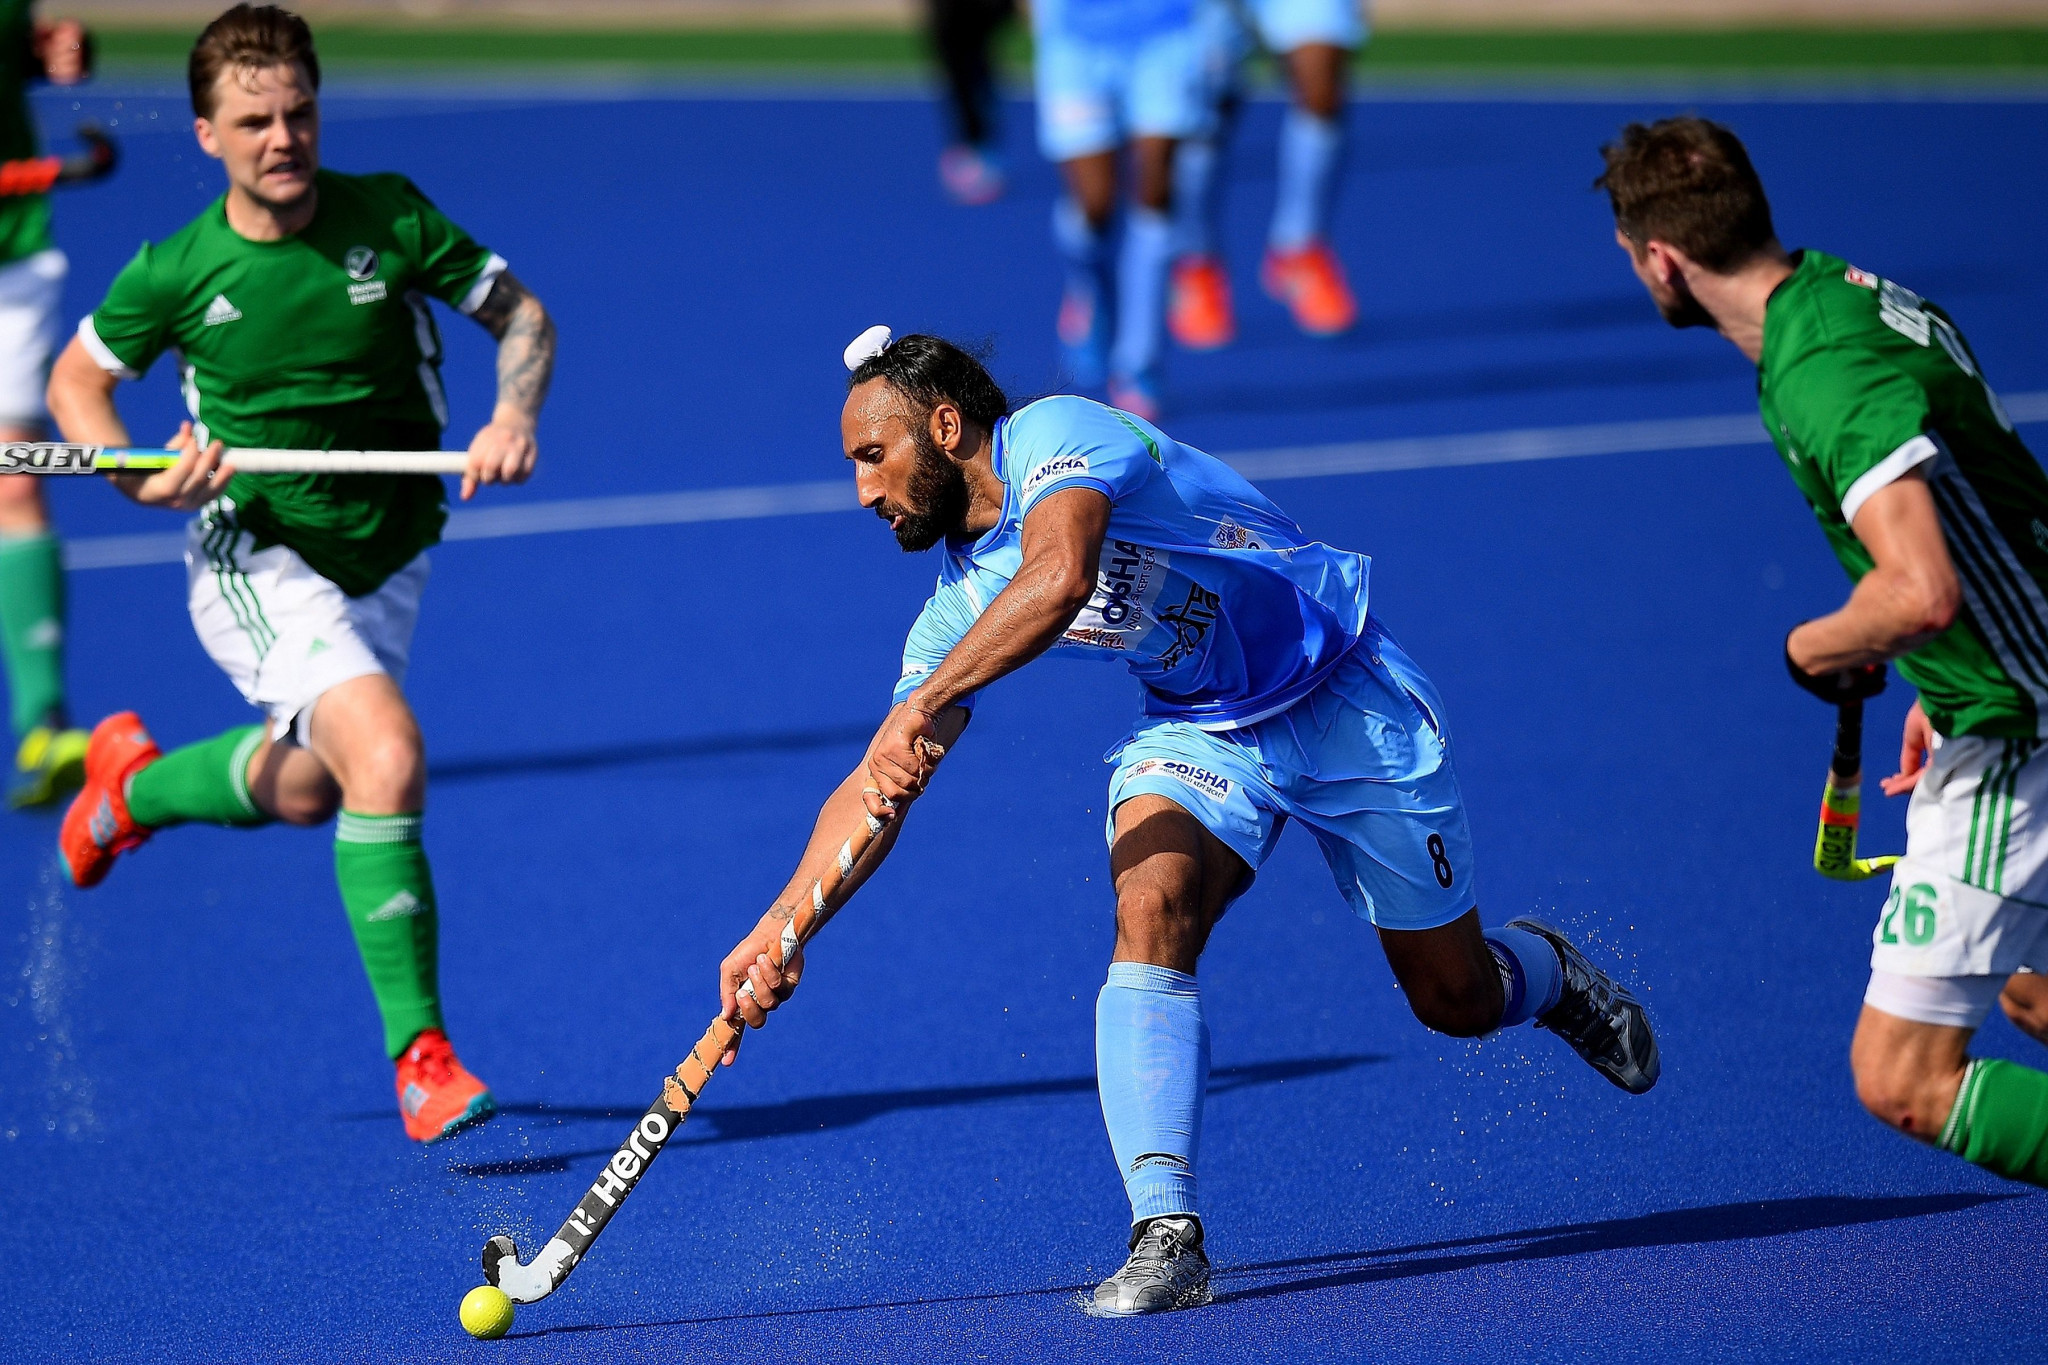 Narinder Batra criticised a decision by English police to question Sardar Singh in connection with an alleged sexual offence case after India had beaten Pakistan 7-1 in the Hockey World League semi-final in London ©Getty Images